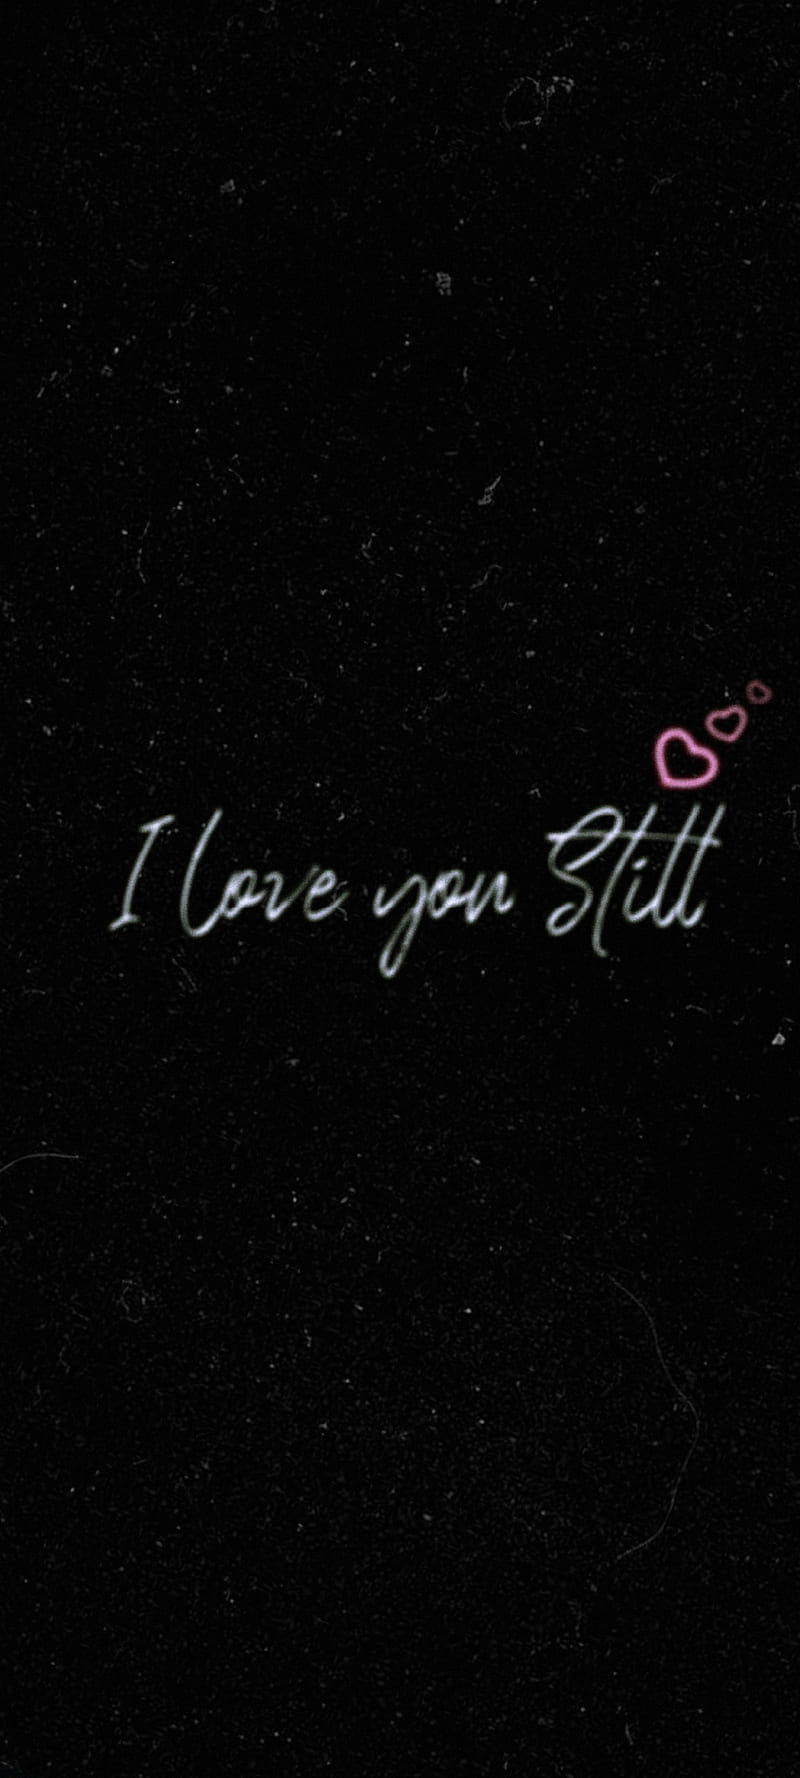 I love you still, message, miss, missing, worry, HD phone wallpaper | Peakpx